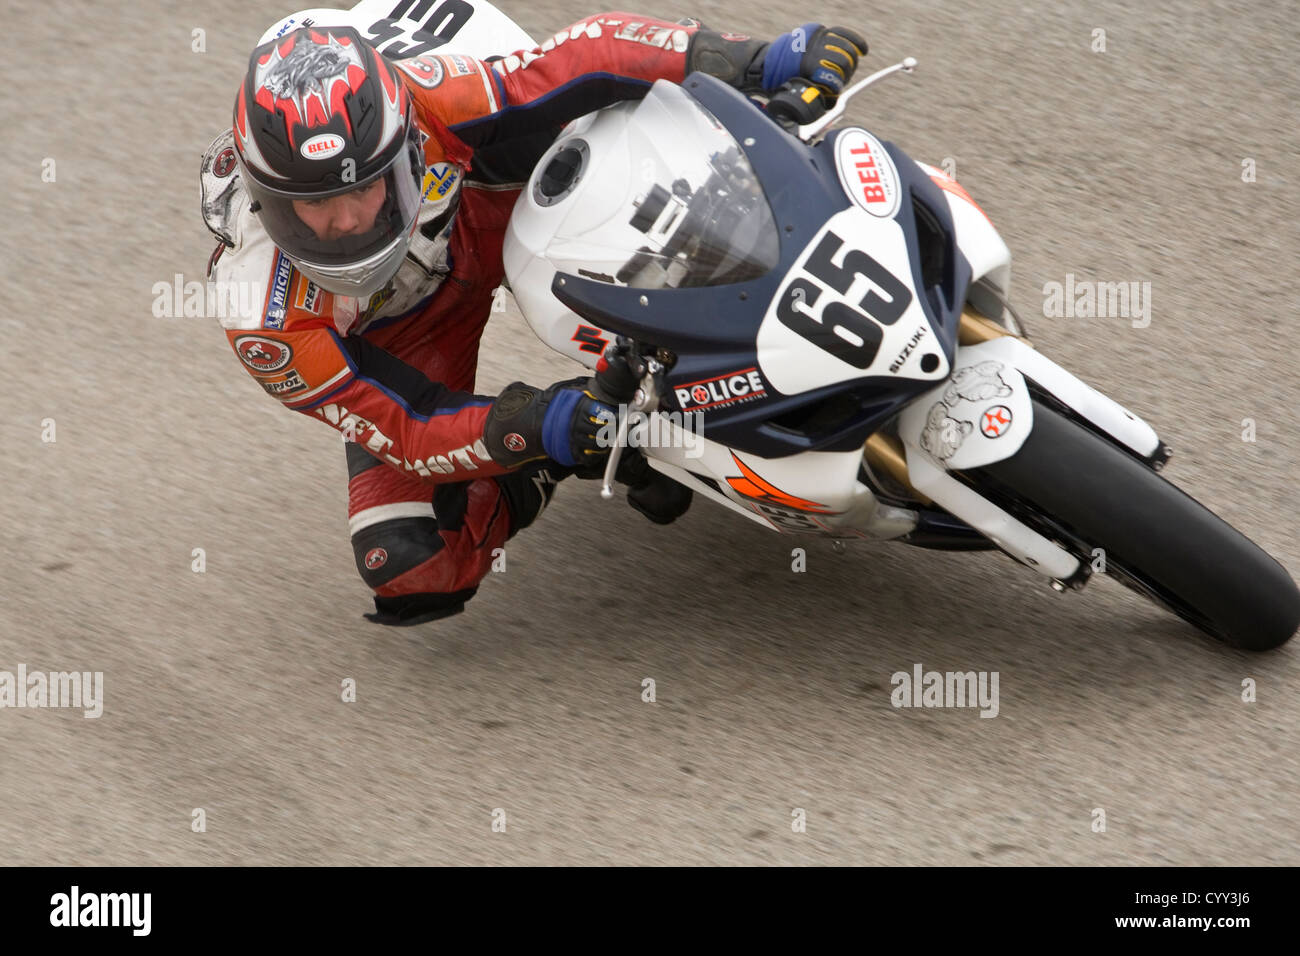 A motorcyclist races on a track at WIllow Springs International Raceway in California. Stock Photo